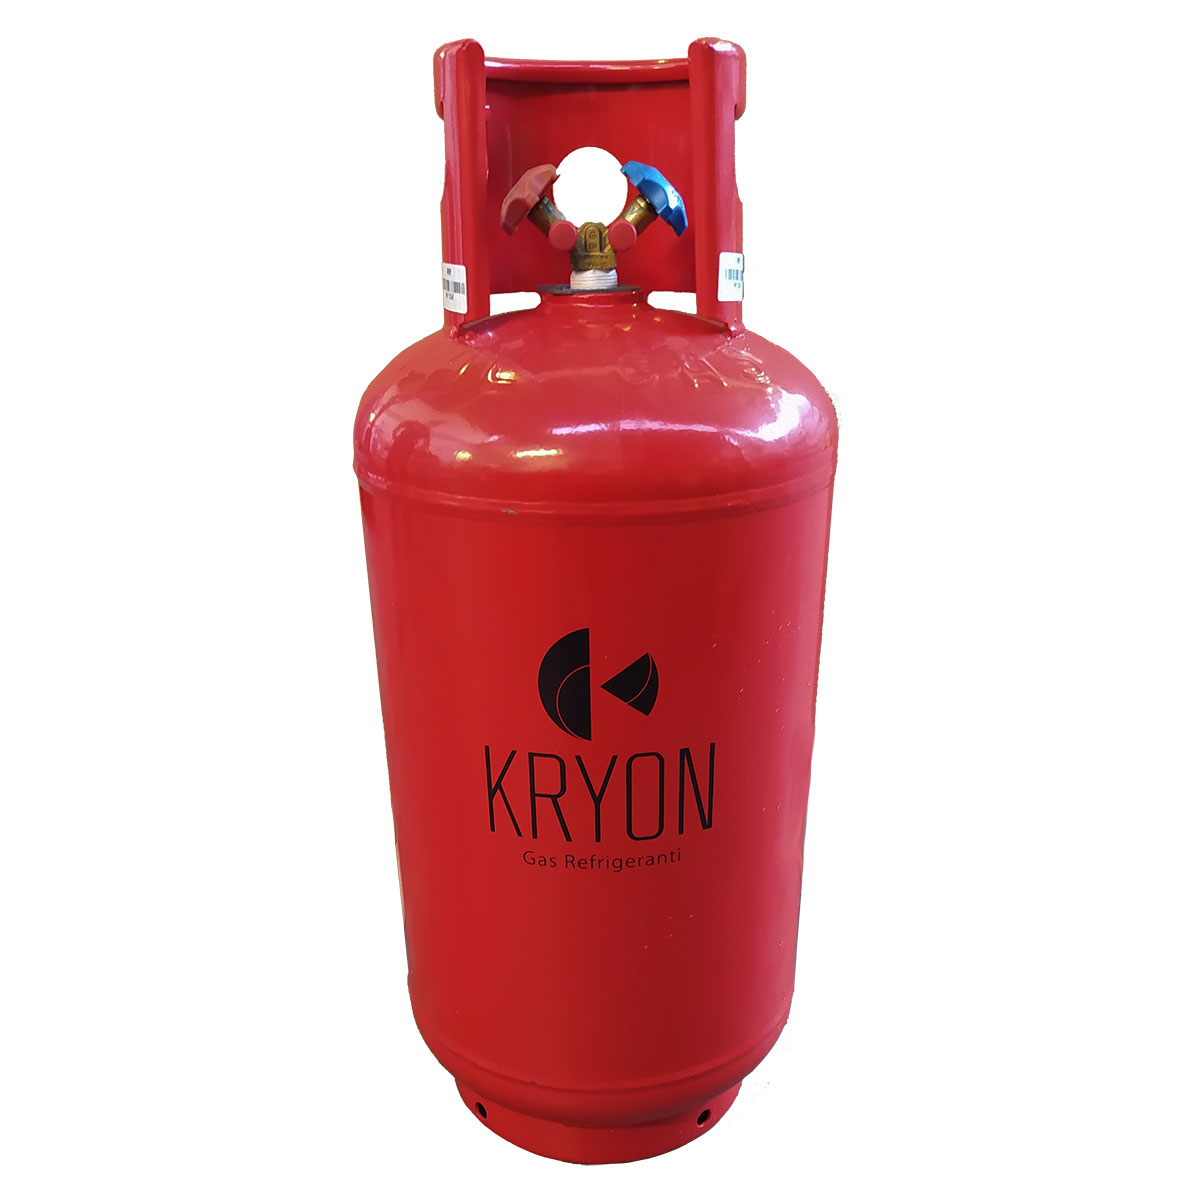 Empty recovery cylinder for flammable refrigerants T-PED 40 lt - 48 bar fitted with double phase Y valve 1/2 -16 ACME LH (suitable also for gas recovery)